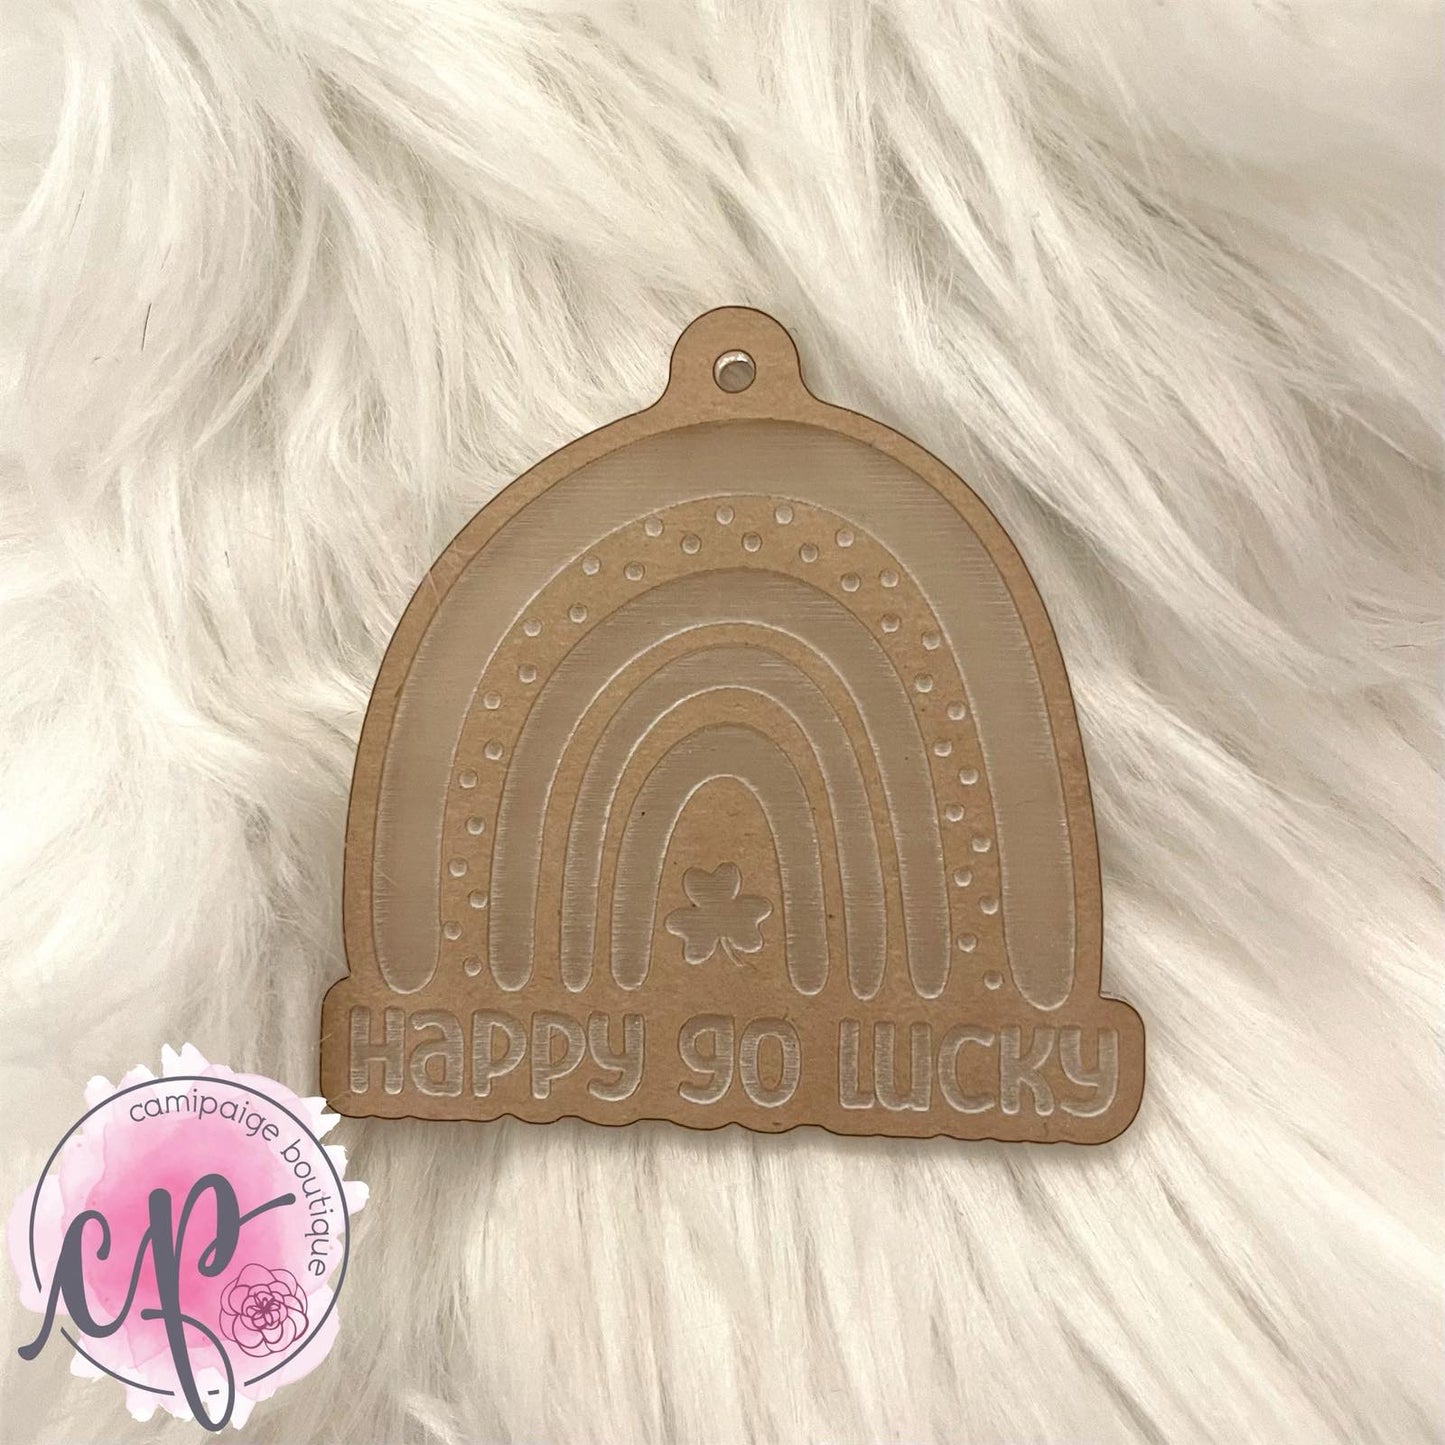 Happy Go Lucky -Engraved Acrylic Blank - CamiPaige Boutique